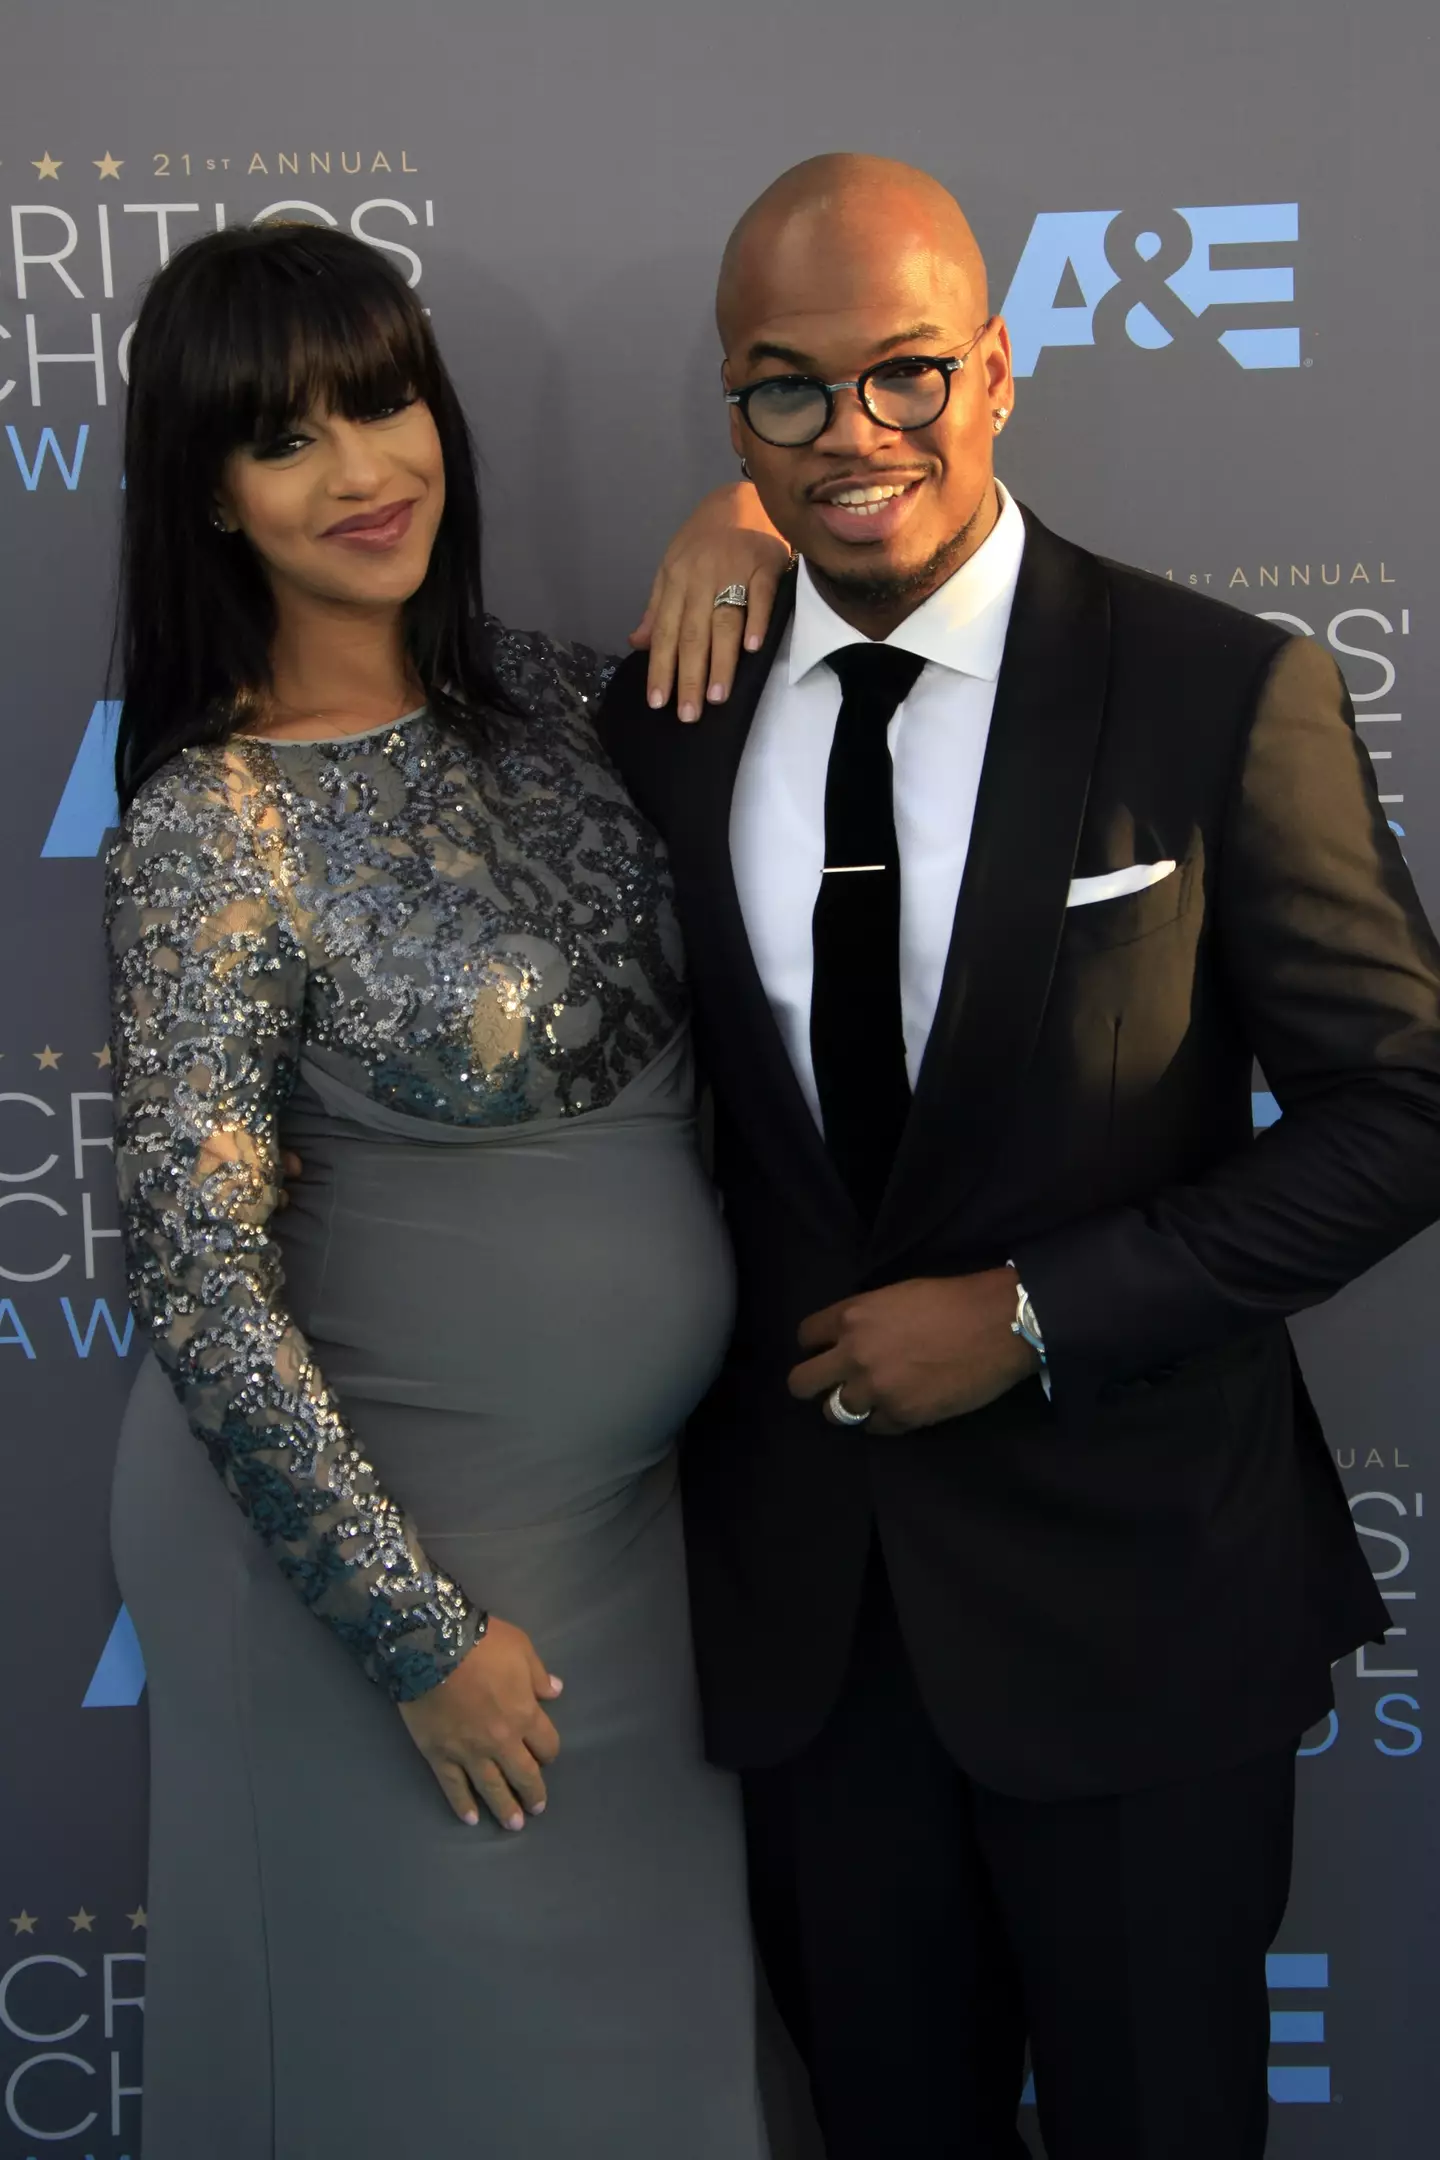 Ne-Yo's wife has accused the singer of cheating.